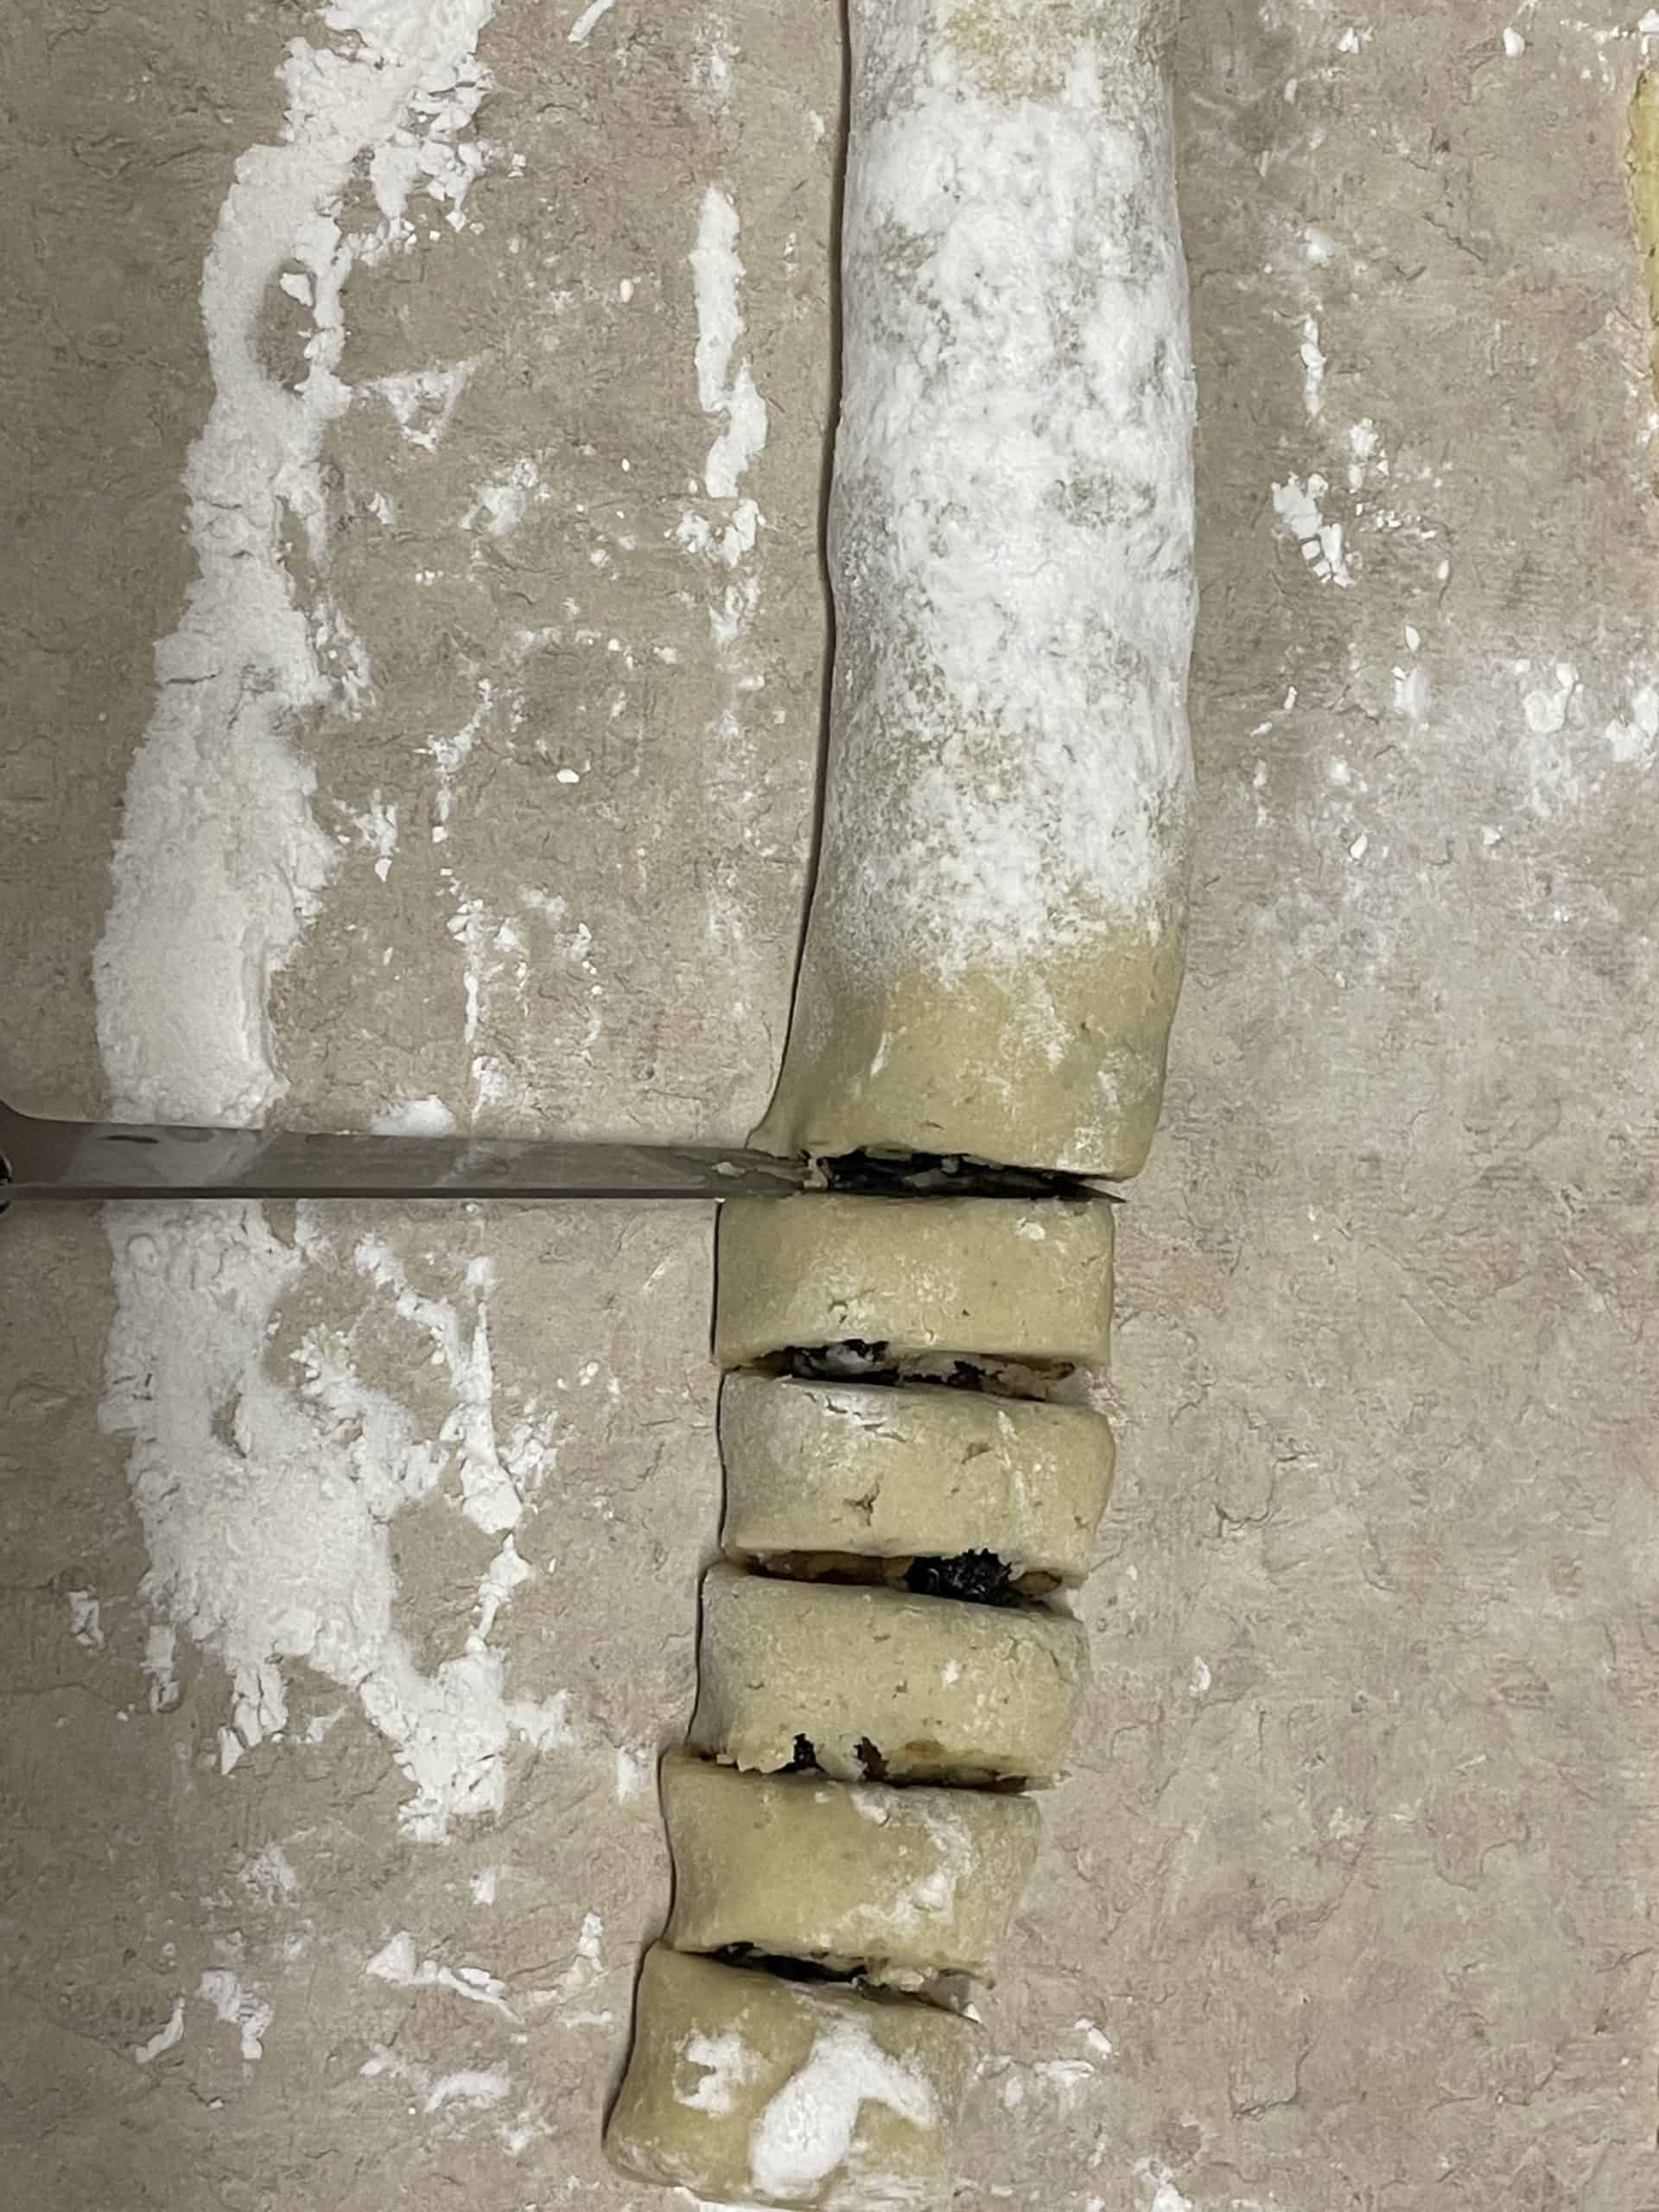 Cut the cookie dough log into 1 inch pieces.